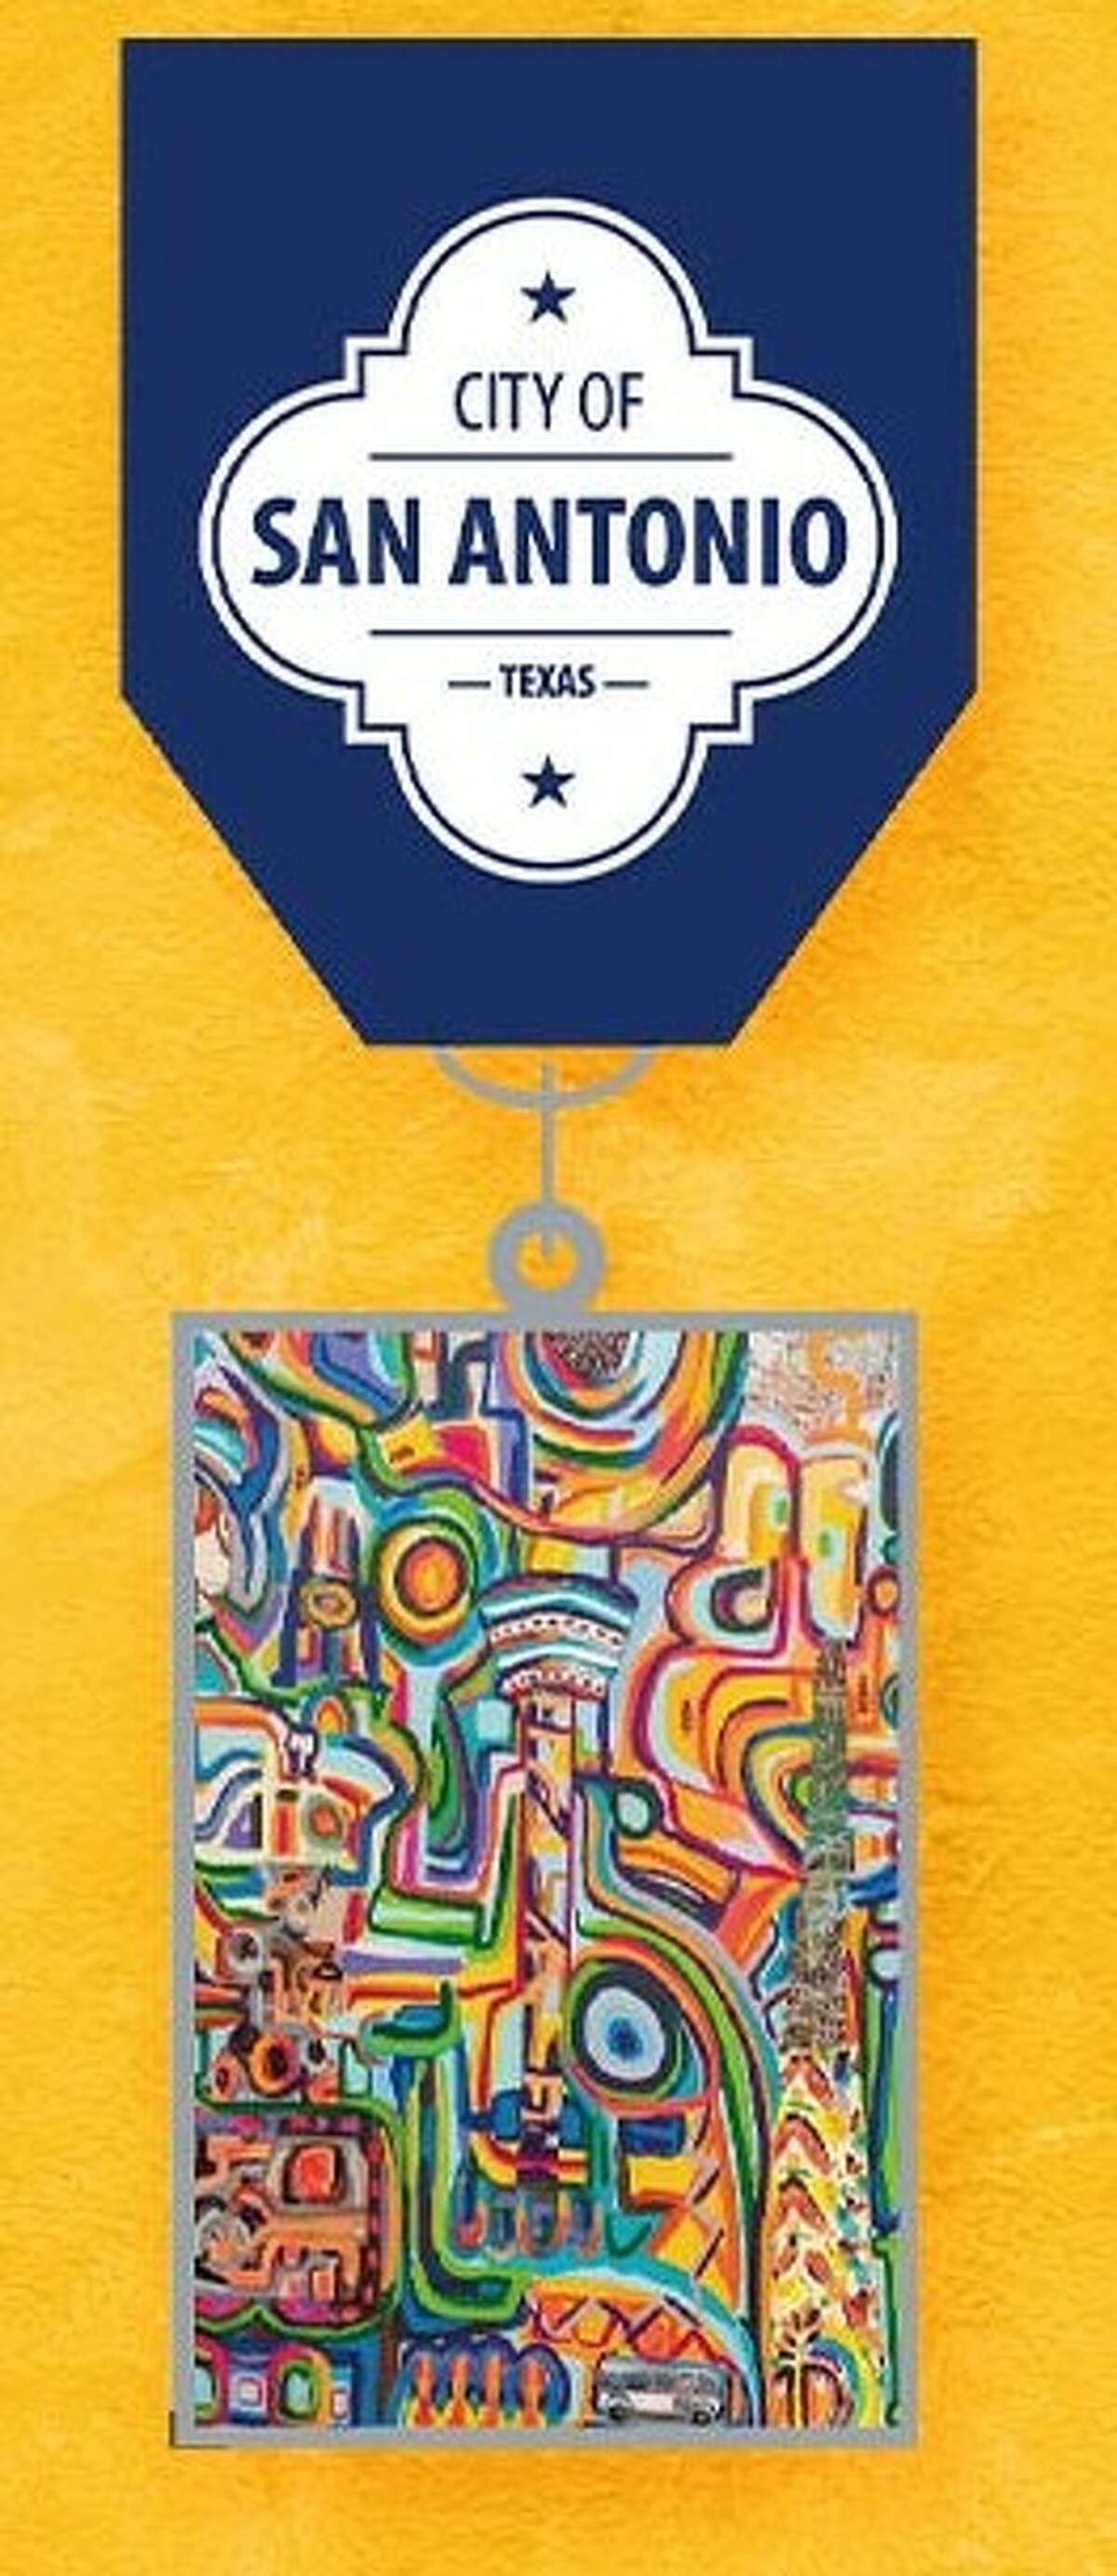 The City of San Antonio's Official 2022 Fiesta Medal.